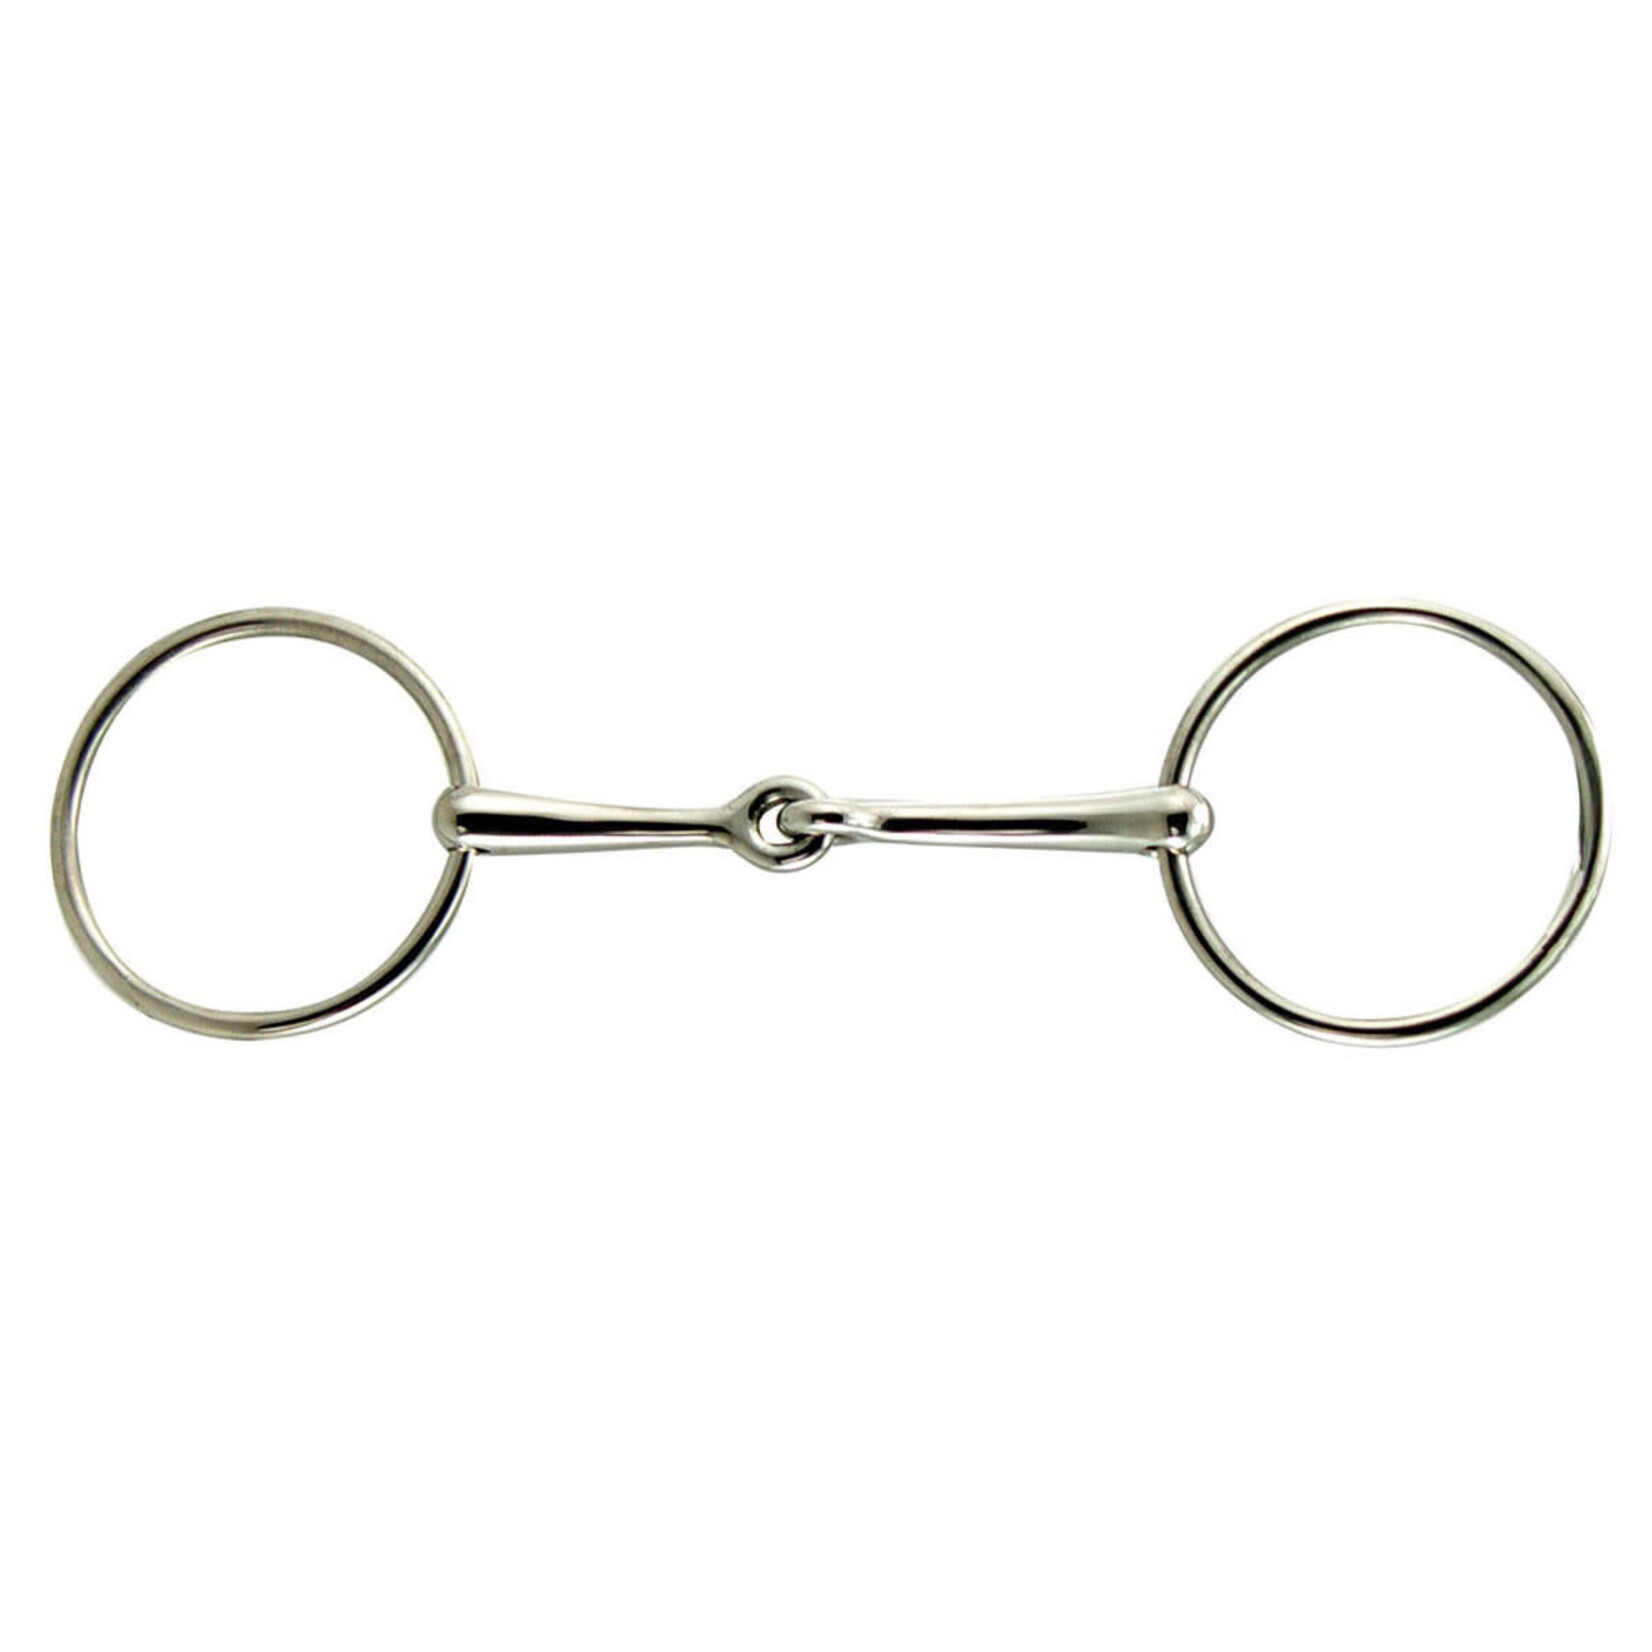 Coronet Loose Ring Snaffle Stainless Steel 11mm Mouth